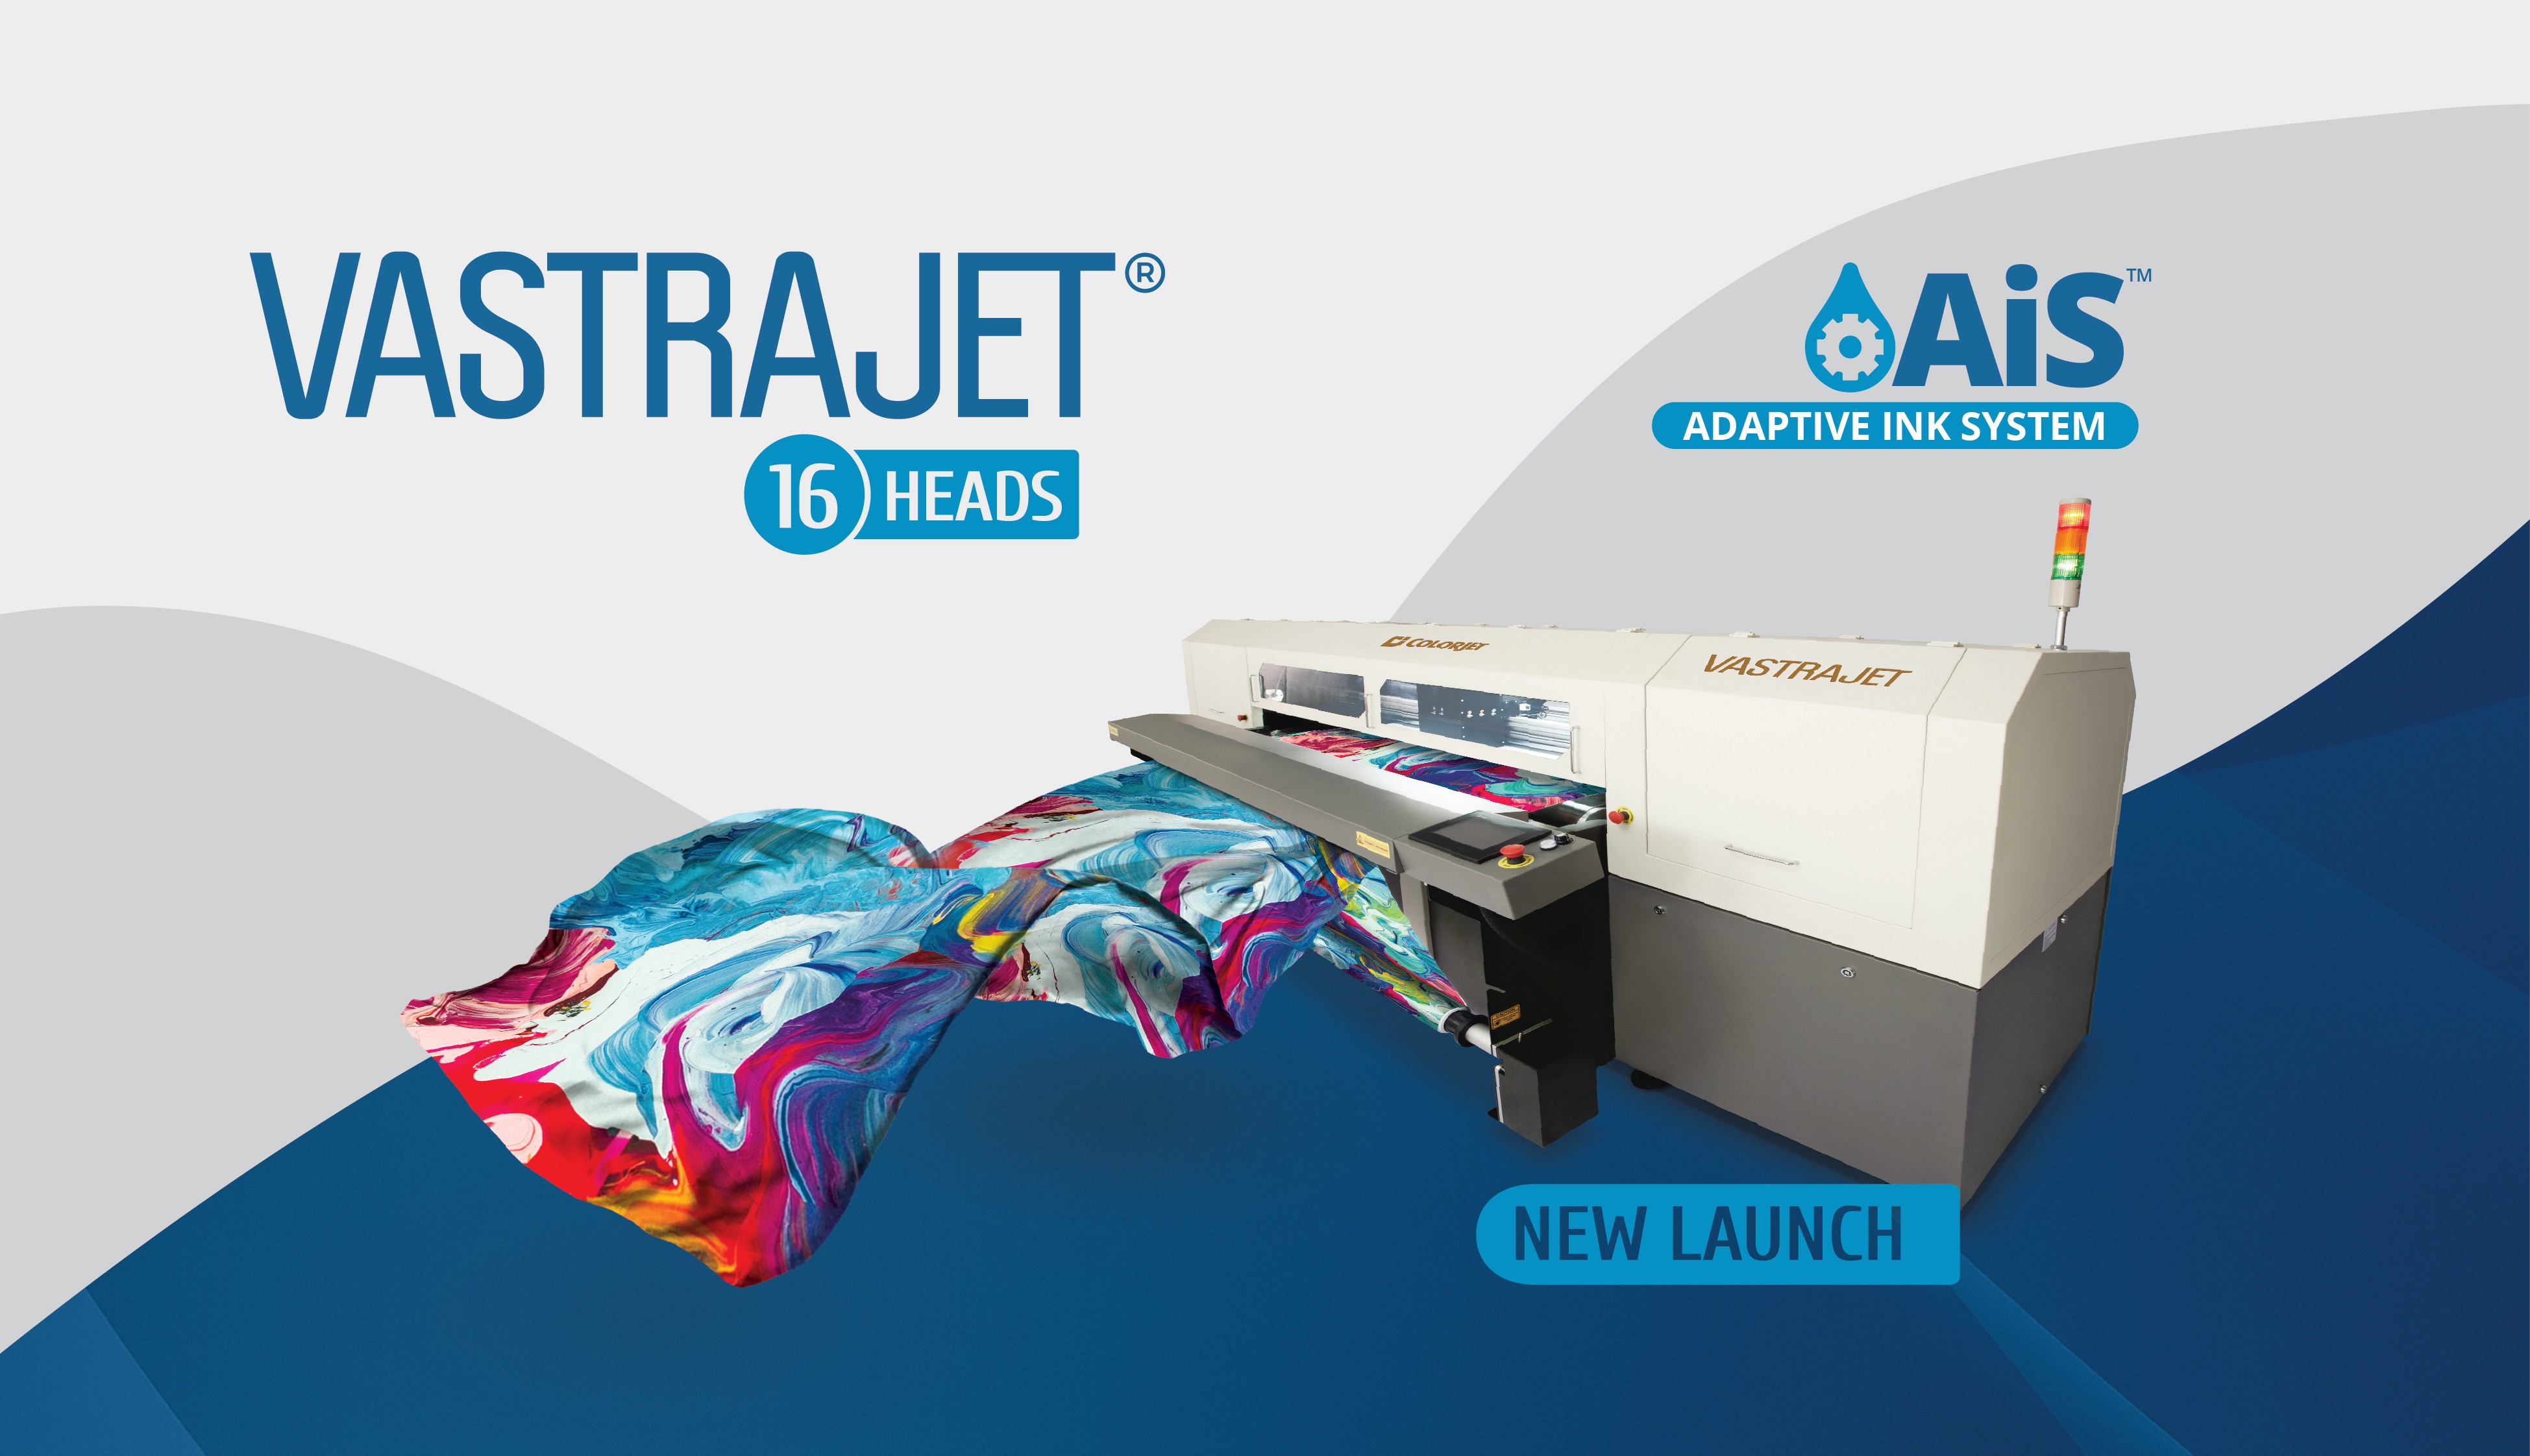 Colorjet to Launch 16 Head Vastrajet® Digital Textile Printer with AiS™ at ITMA 2019